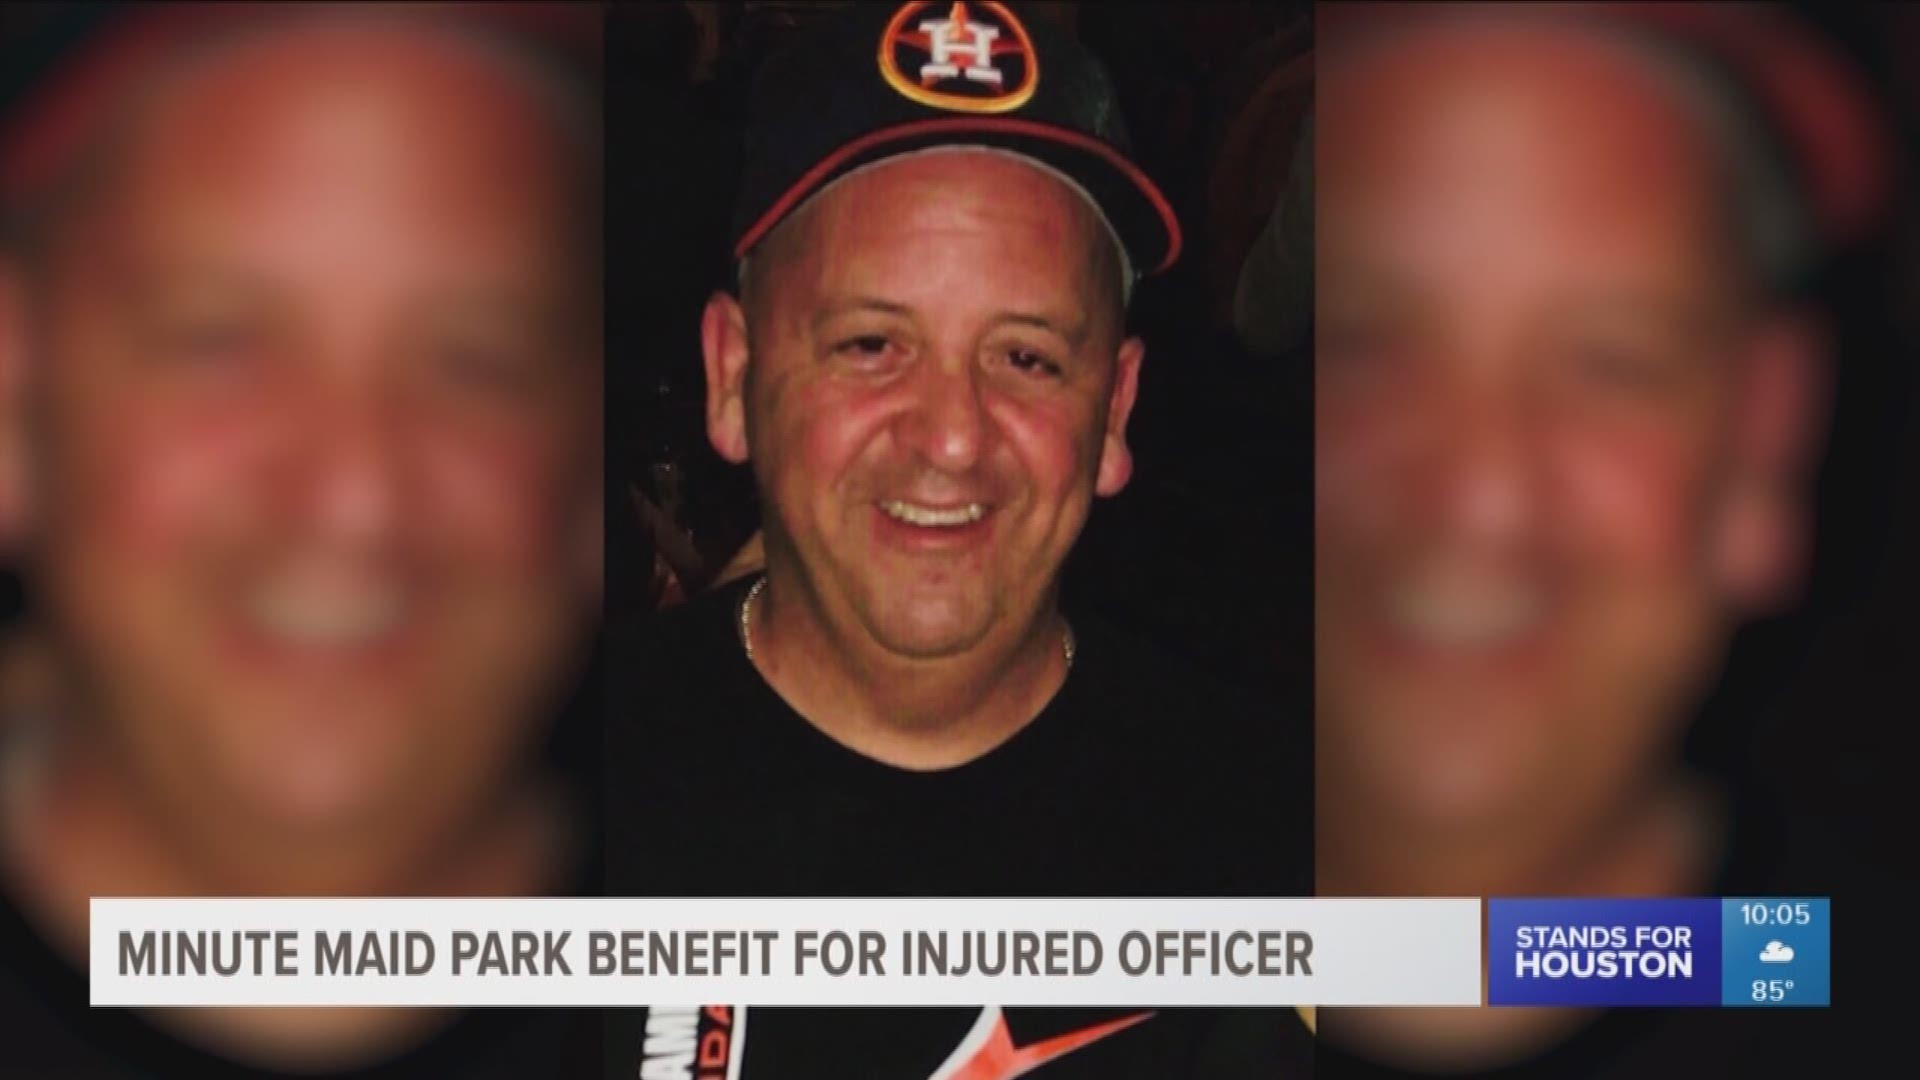 Thursday, the Houston Astros will host what could be the largest fundraiser ever for injured Houston police officer Jerry Flores. Flores was critically injured in a freak accident at a charity golf tournament on April 12.